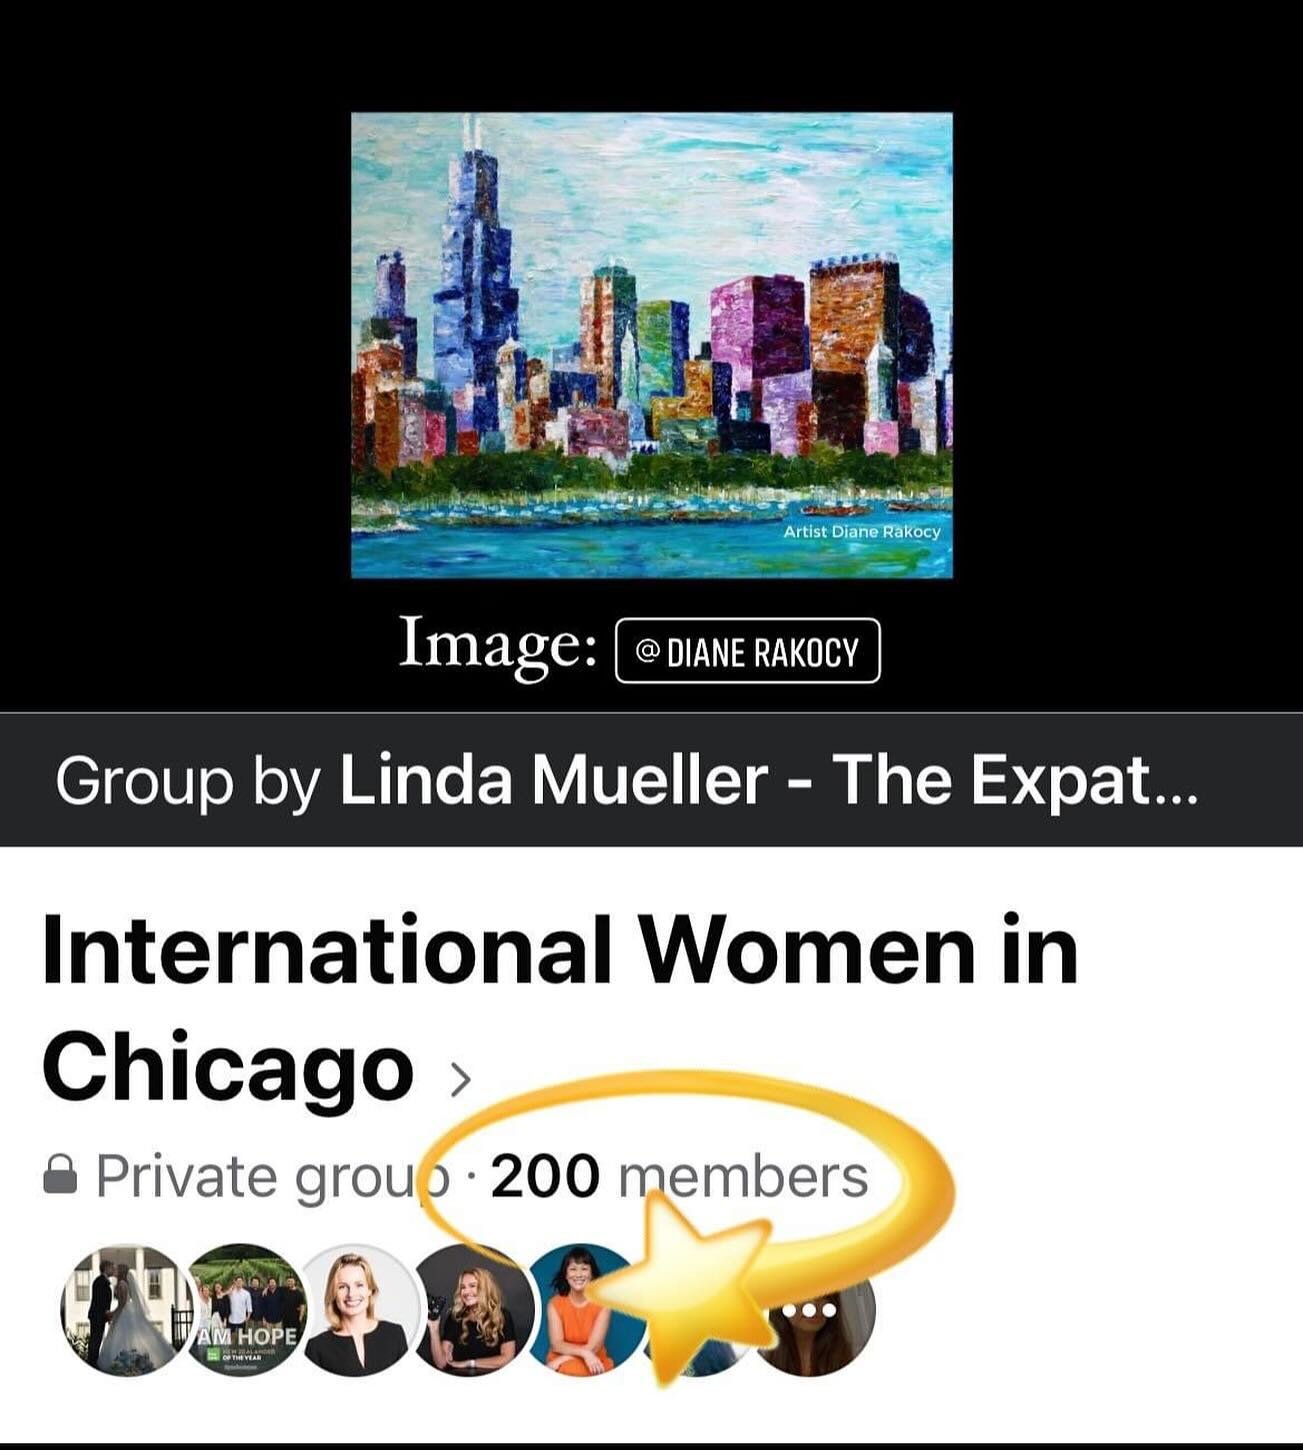 🎊Look at us grow!🎊

We now have 200 International Women in Chicago members who are connecting in person, as well as in our very active Facebook group.

IWC is my passion project. It&rsquo;s based off of my experience planning fun events and outings